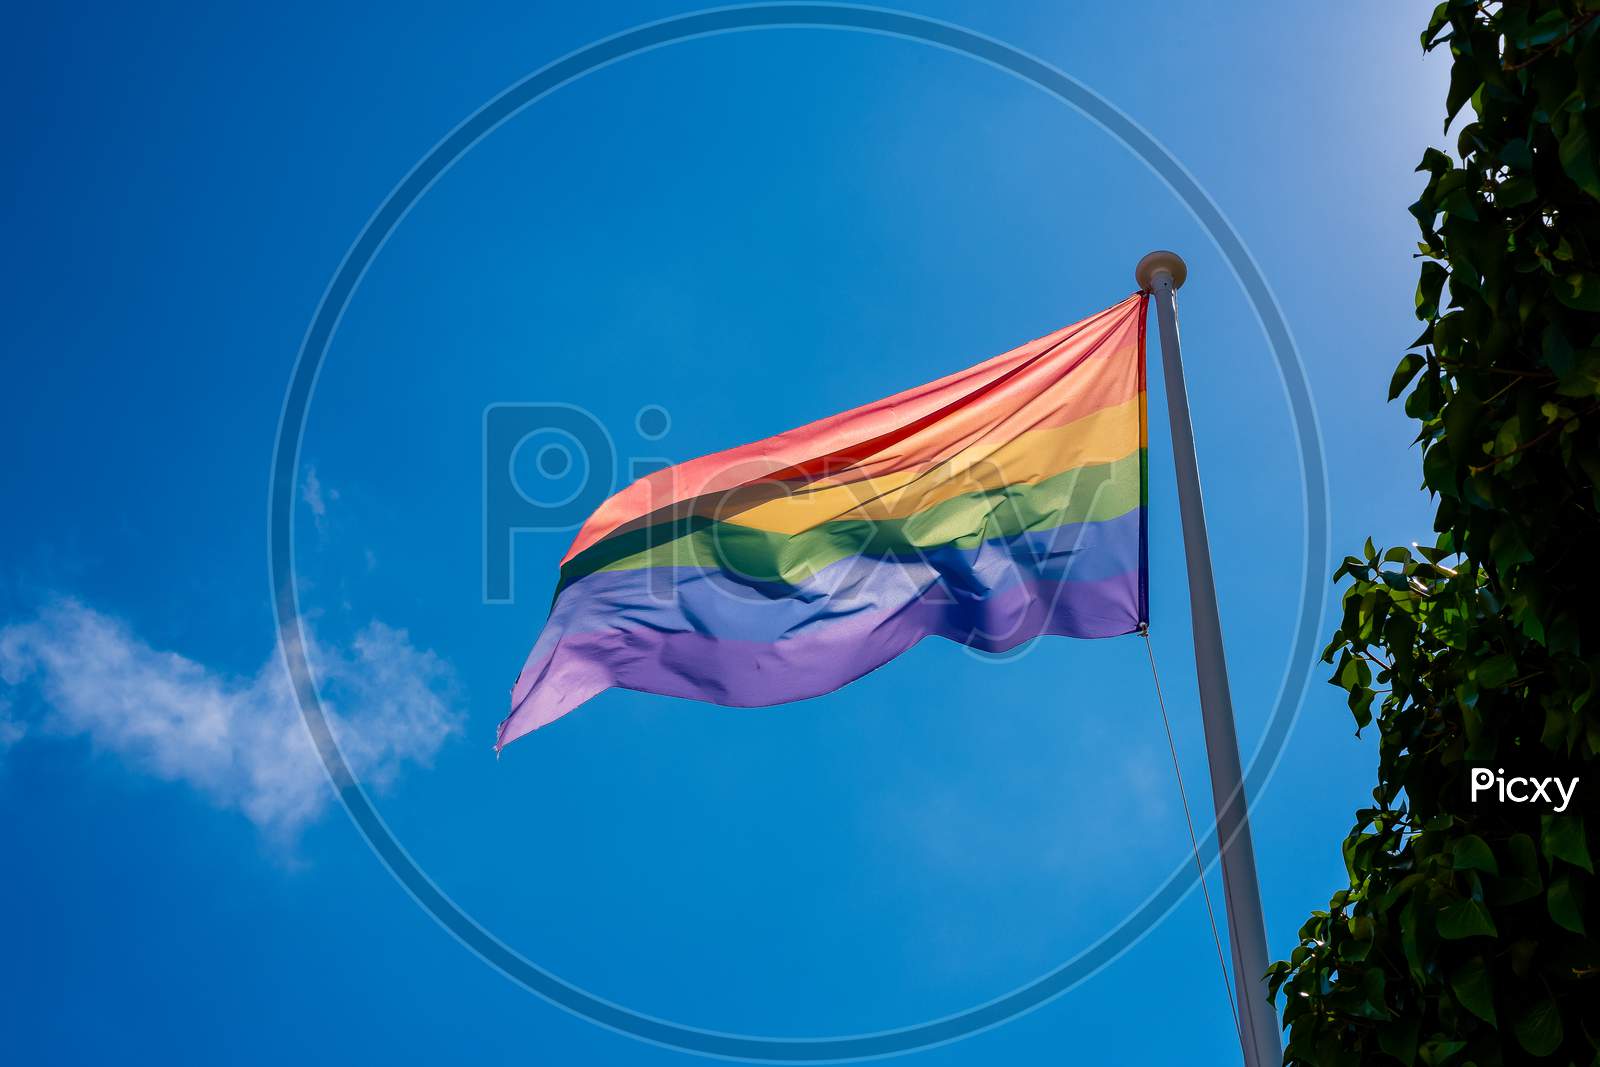 LGBT pride flag hung on a mast and waving in the blue sky